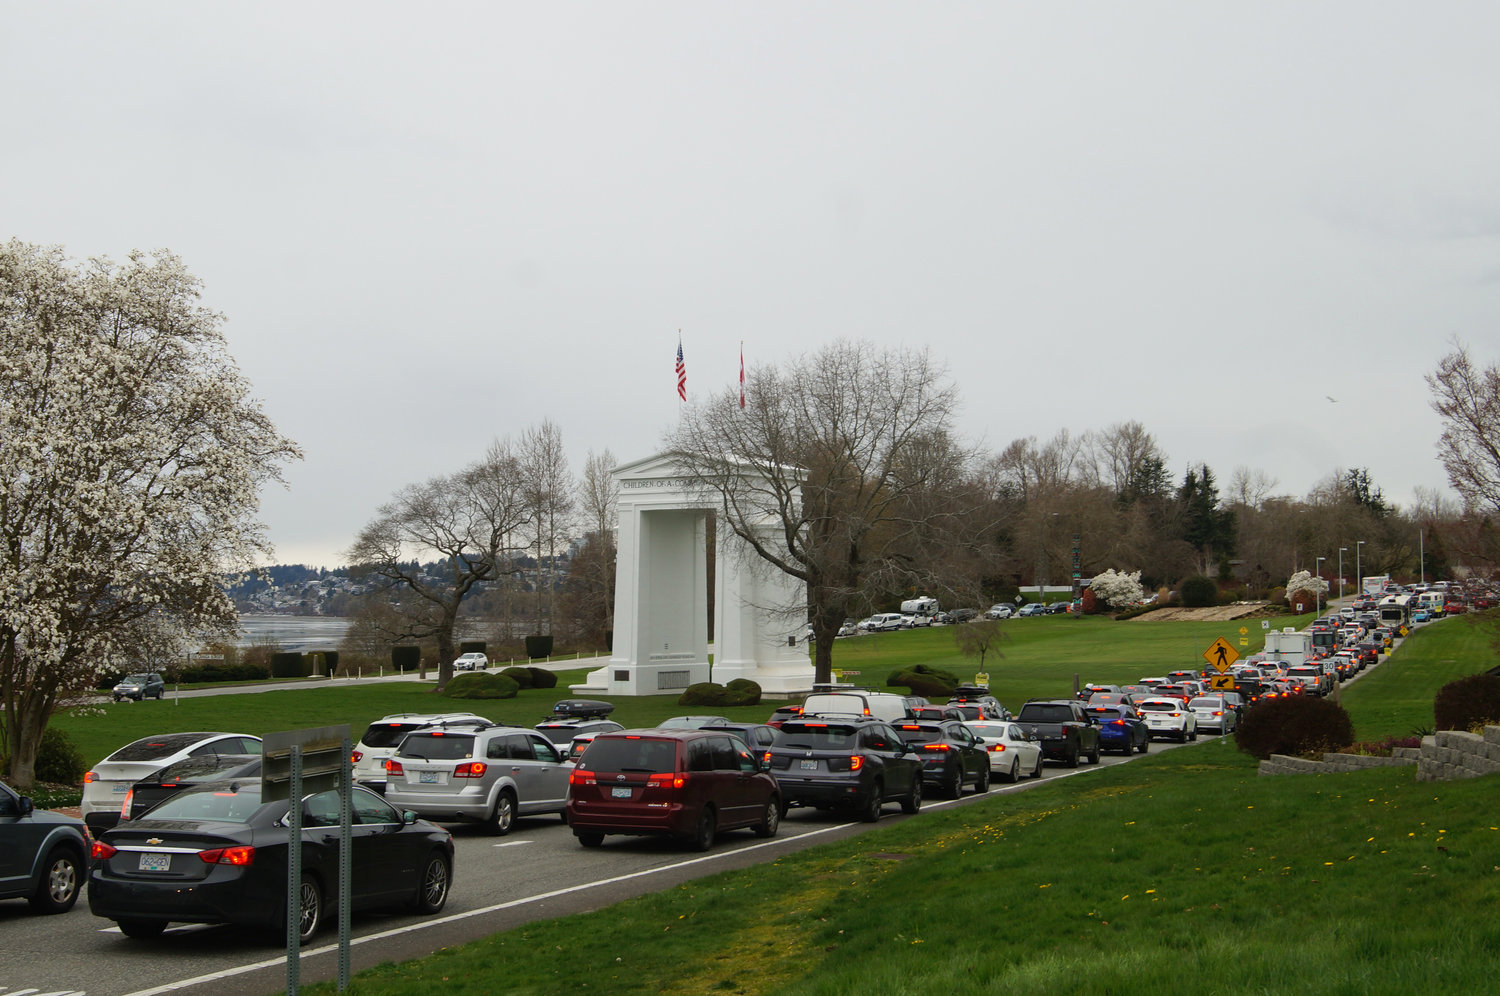 Travelers lined up to enter Canada in April 2022, the day the Canadian government dropped its antigen testing requirement for fully vaccinated travelers. Over 7,400 vehicles crossed both ways through the Peace Arch border crossing on April 1, according to data from Cascade Gateway.